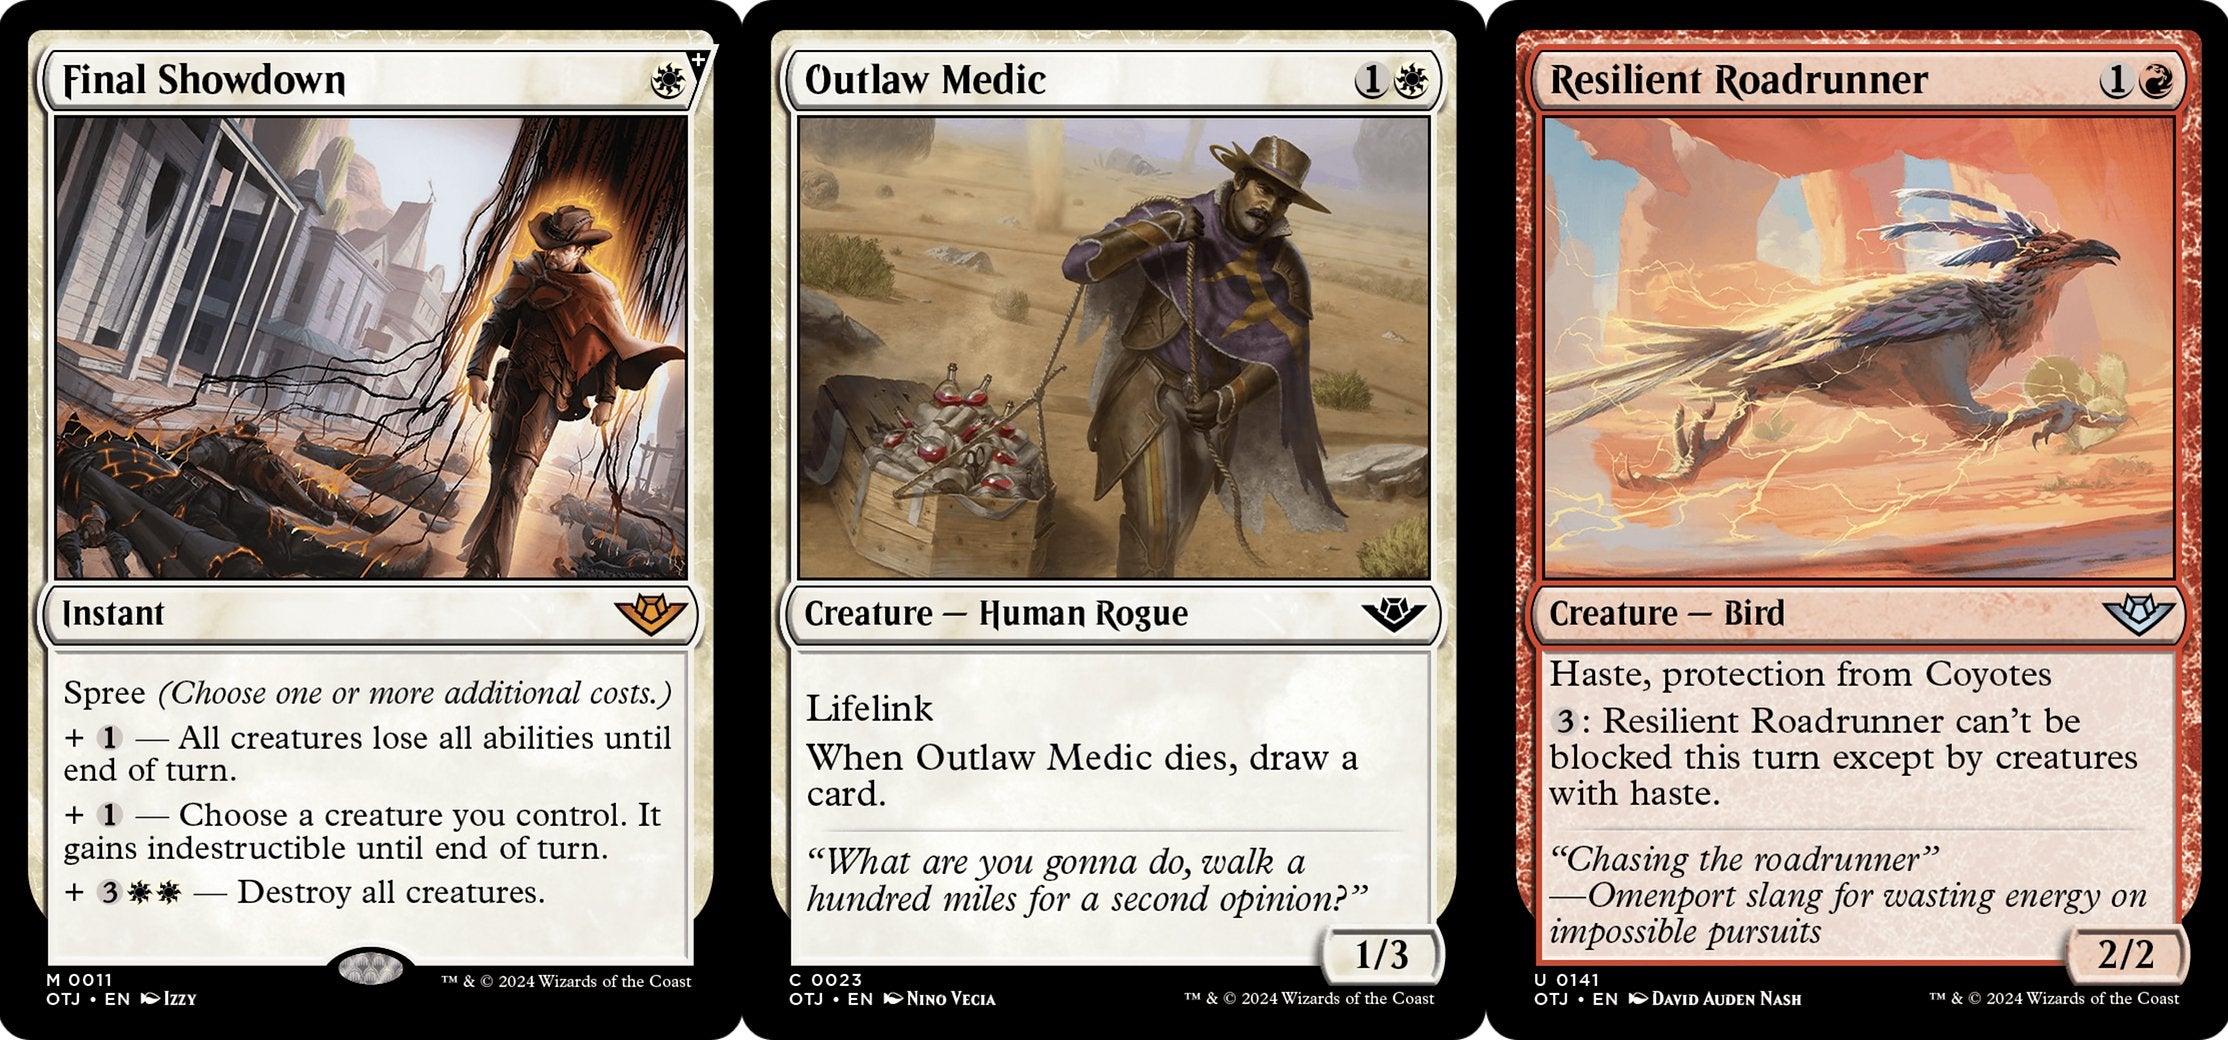 The Final Showdown, Outlaw Medic, and Resilient Roadrunner cards in MTG.